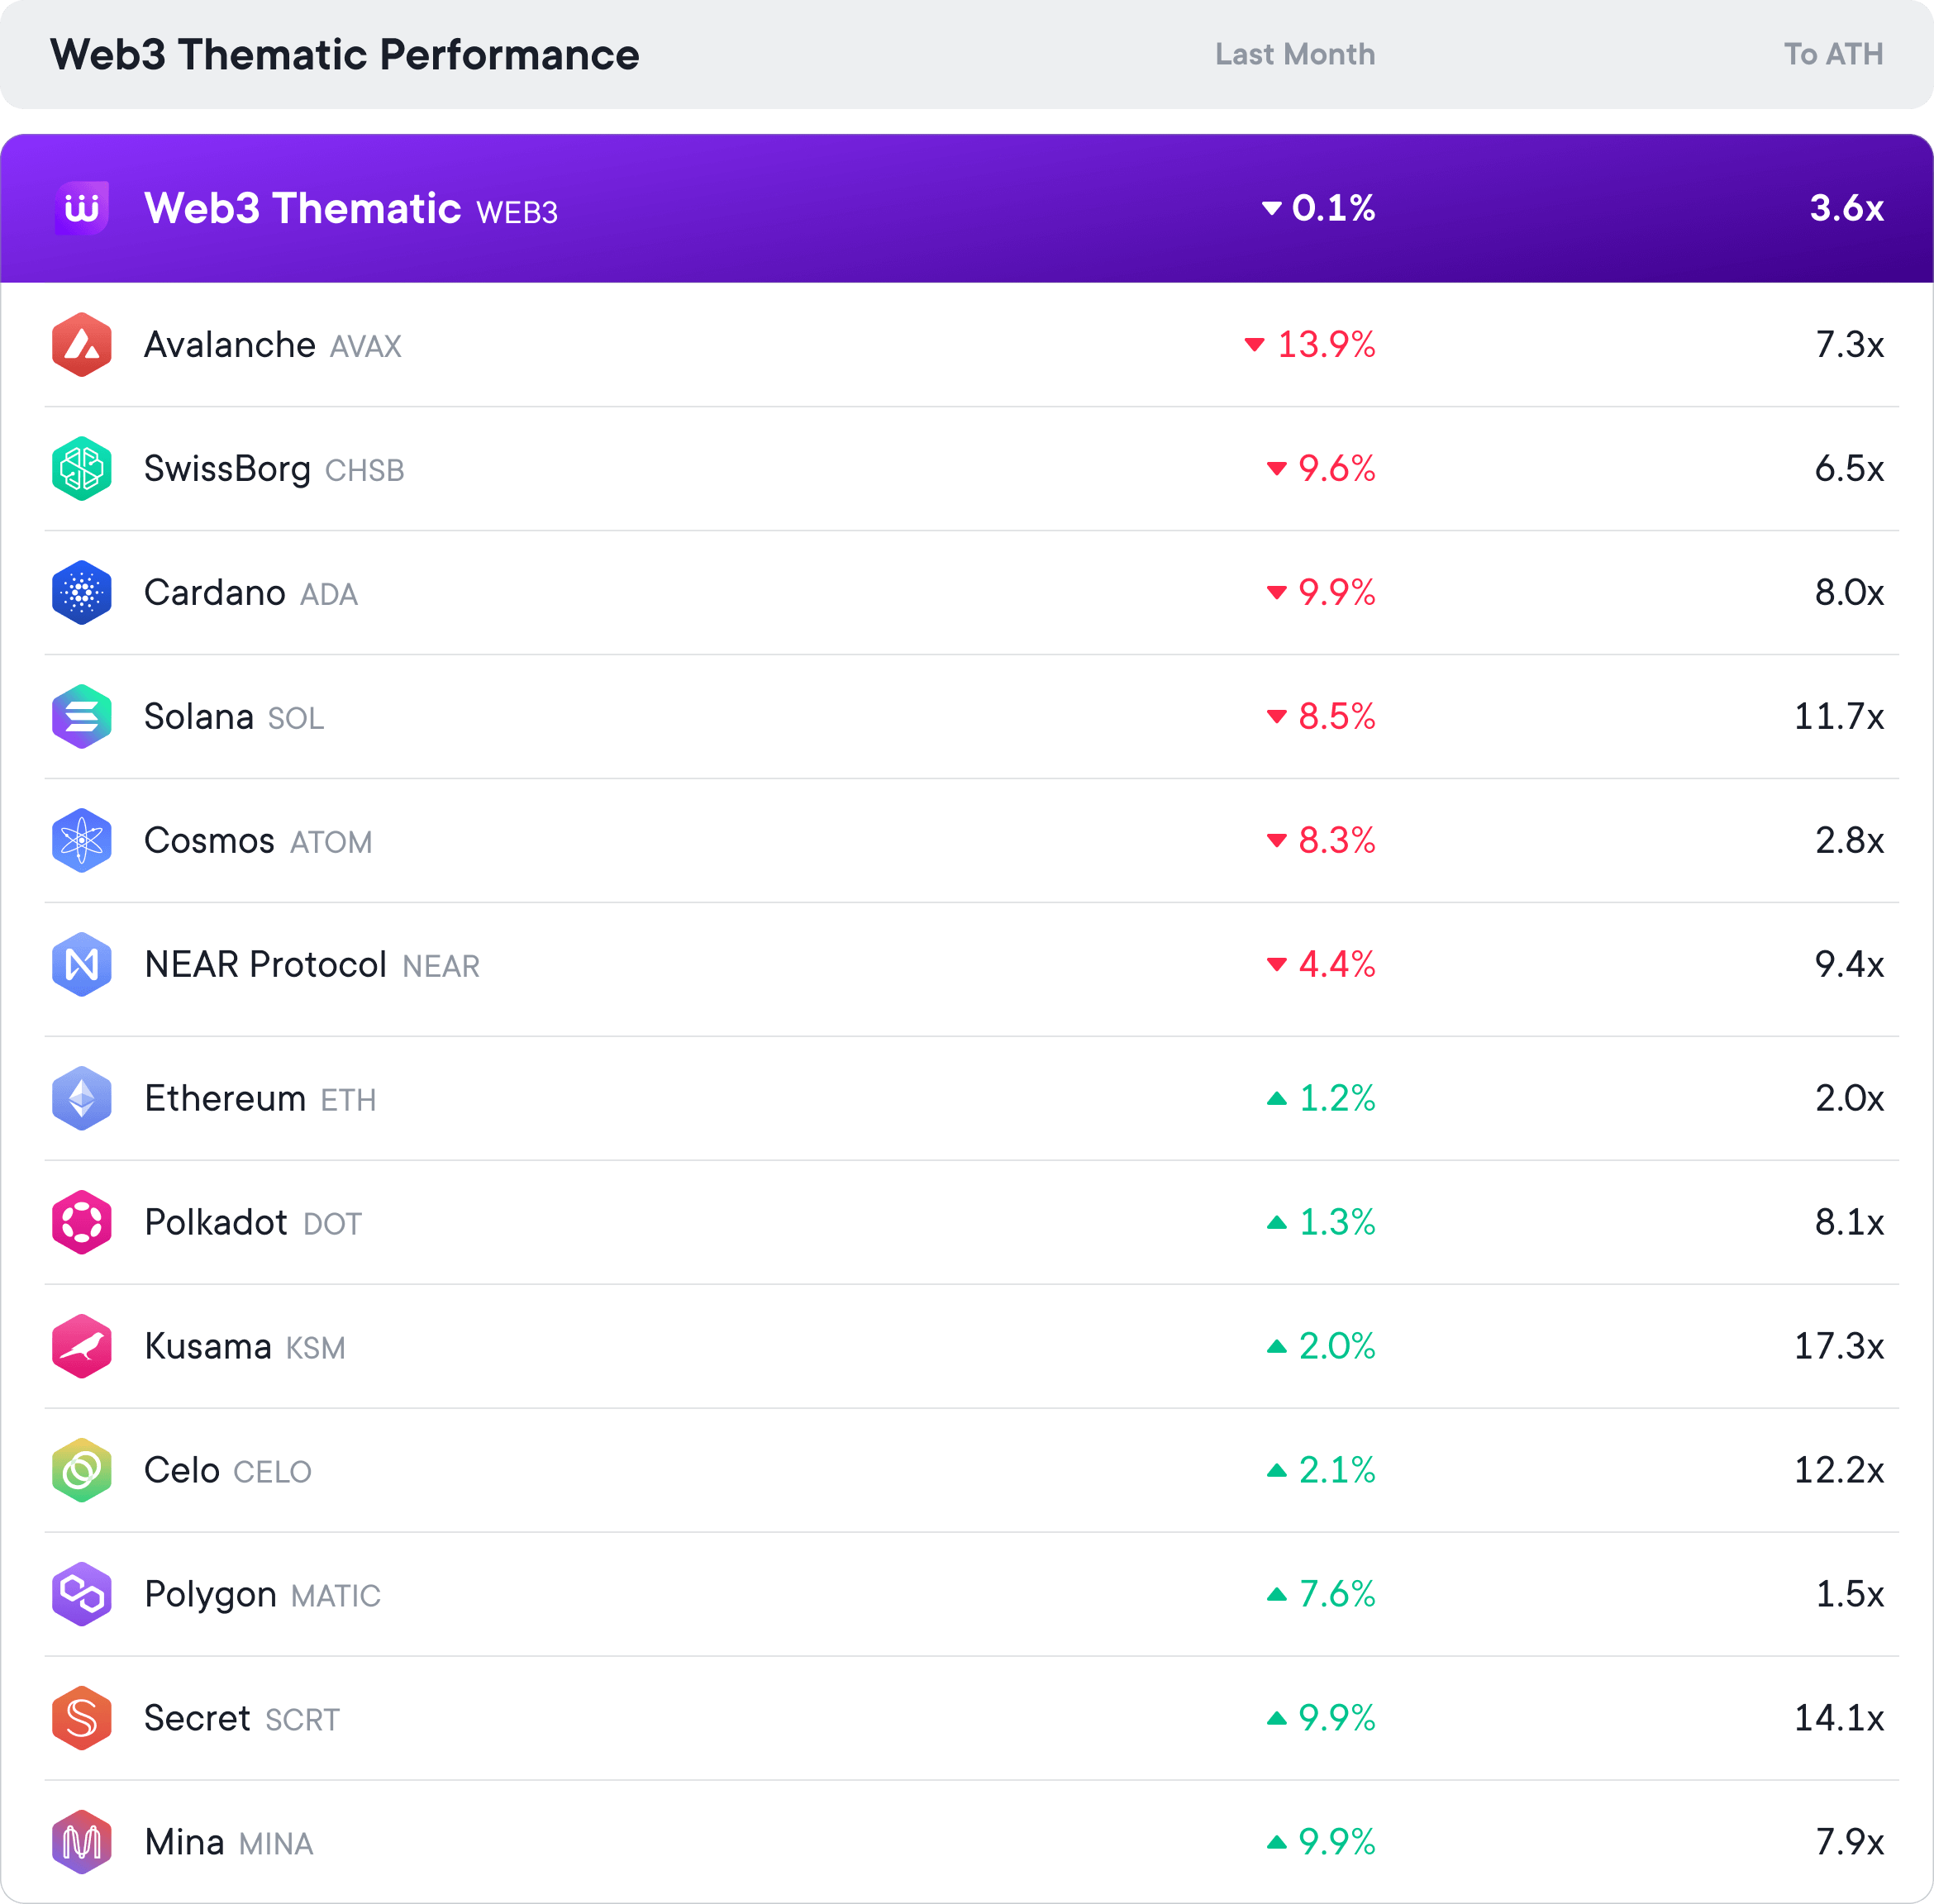 The performance of all tokens